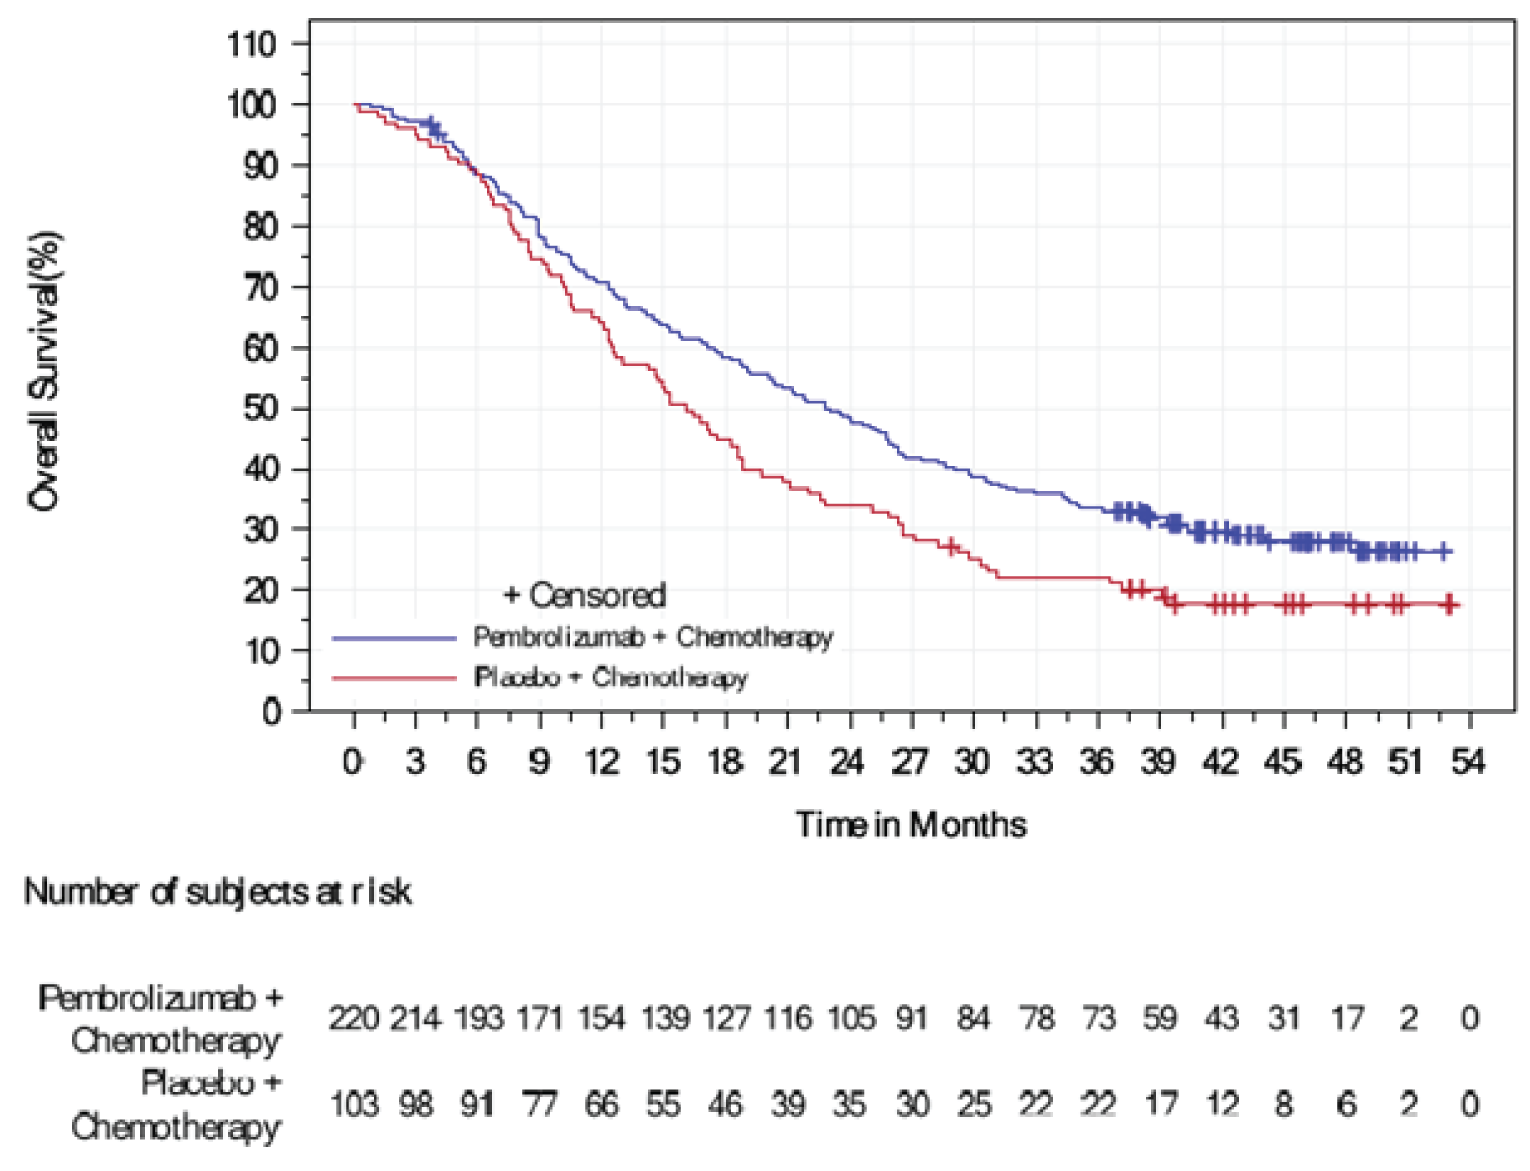 Figure 4 shows the Kaplan-Meier estimates of OS at final analysis in the ITT population and subset of patients with PD-L1–positive tumours (CPS ≥ 10). The total numbers of at-risk patients in the pembrolizumab plus chemotherapy group at 0, 3, 6, 9, 12, 15, 18, 21, 24, 27, 30, 33, 36, 39, 42, 45, 48, 51, and 54 months were 220, 214, 193, 171, 154, 139, 127, 116, 105, 91, 84, 78, 73, 59, 43, 31, 17, 2, and 0, respectively.